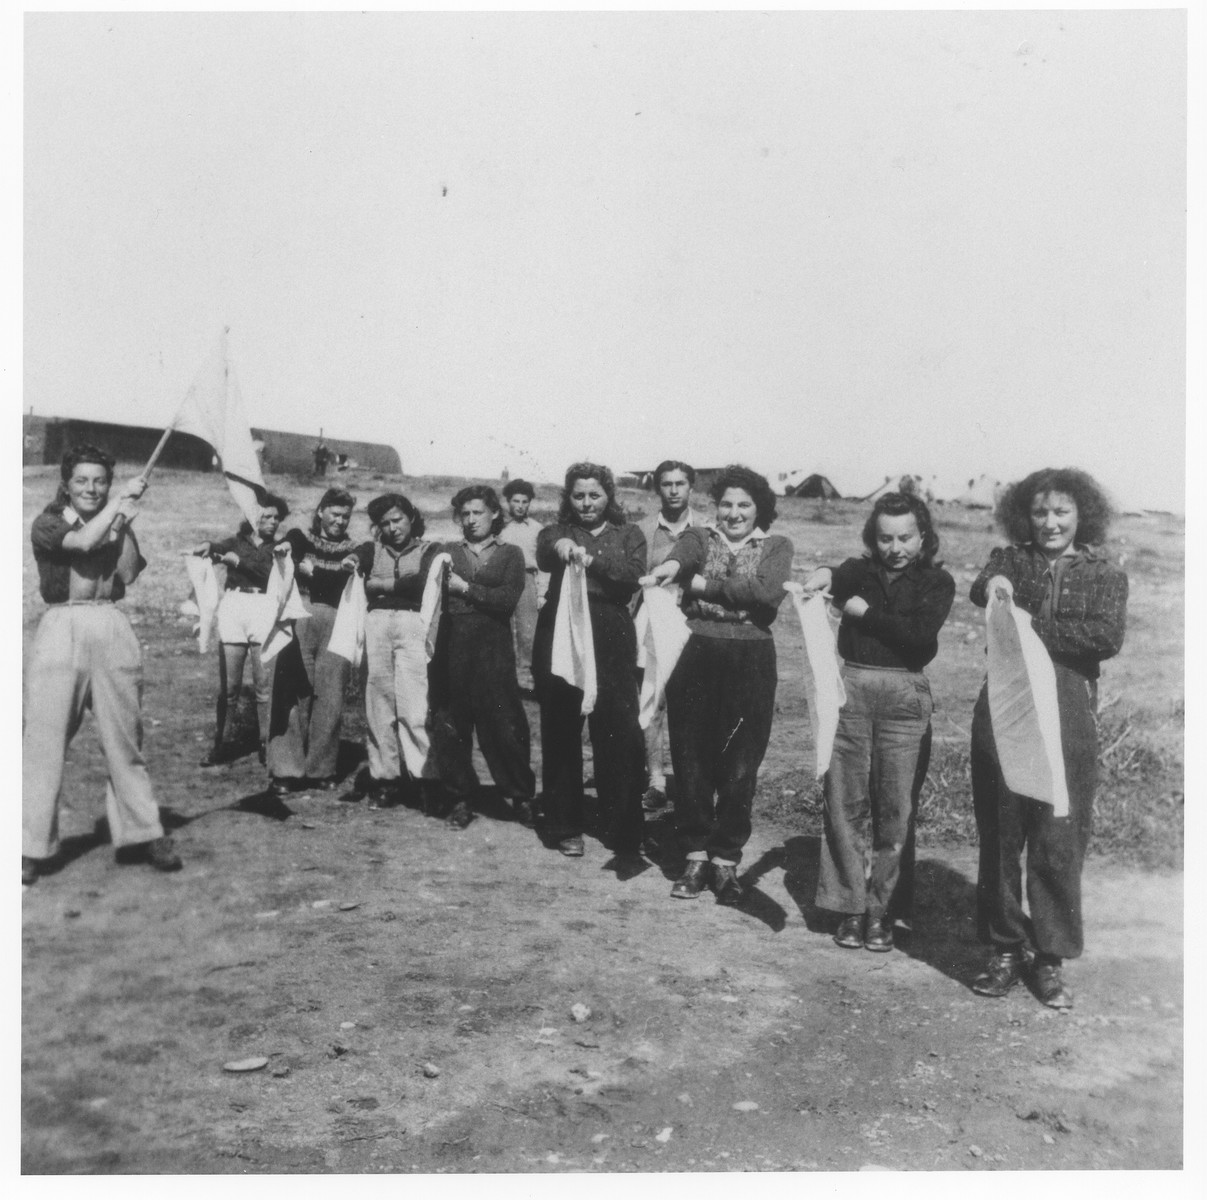 Young Jewish women who have been interned in a detention camp on Cyprus, are instructed in the use signal flags as part of their paramilitary training.

Among those pictured is Pnina Halpern (at the far right).